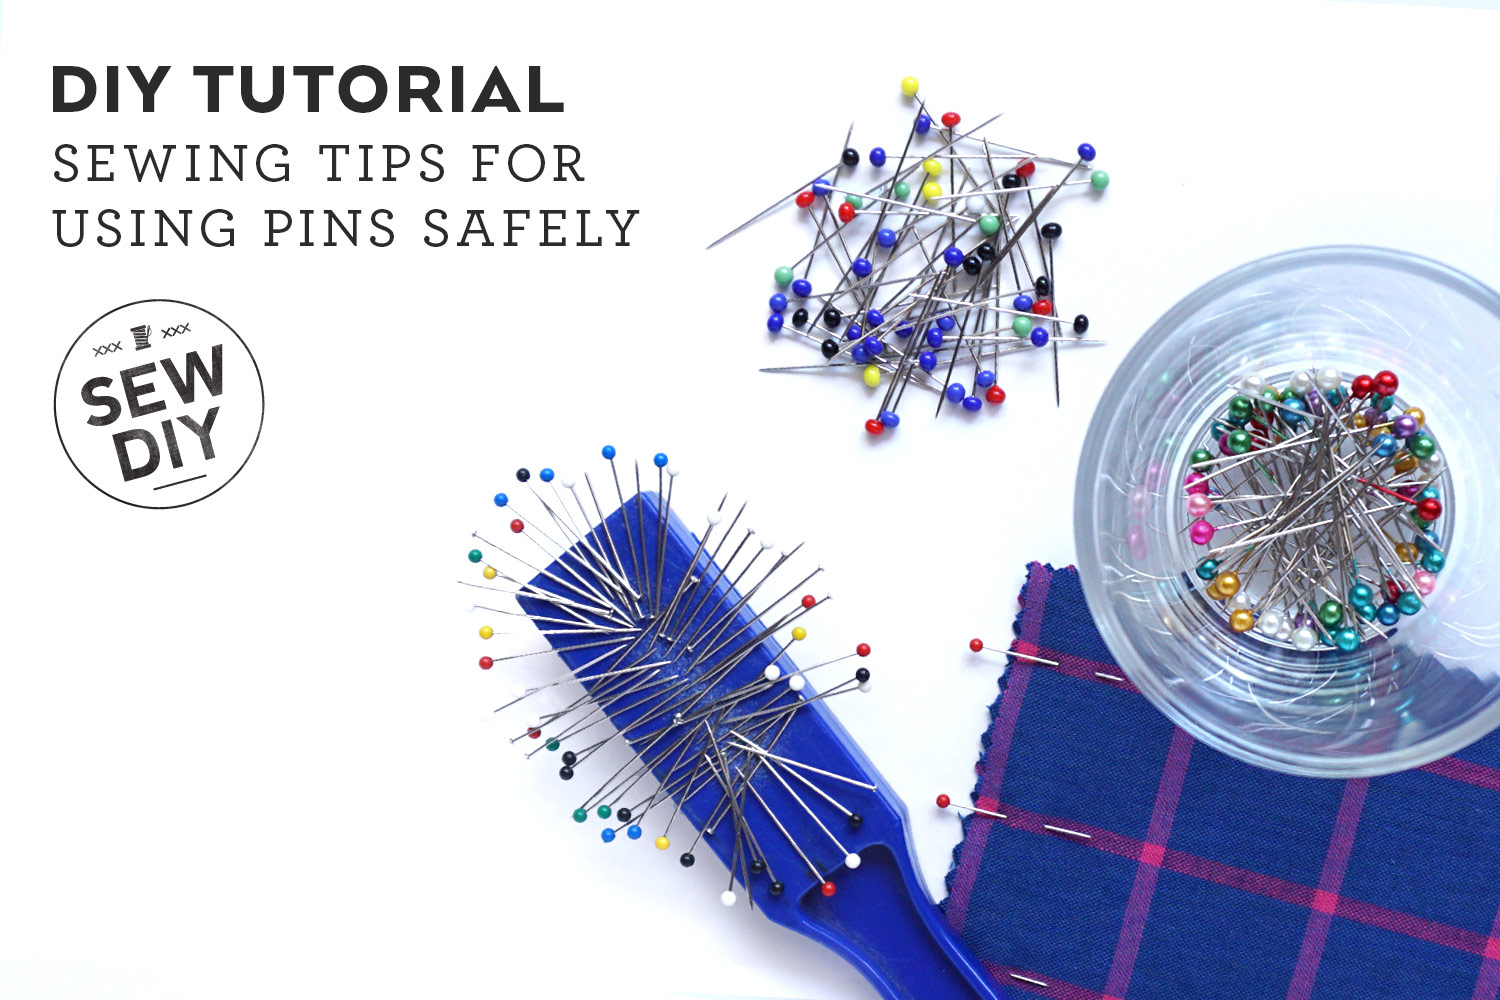 5 Tips for Using Pins Safely When Sewing — Sew DIY